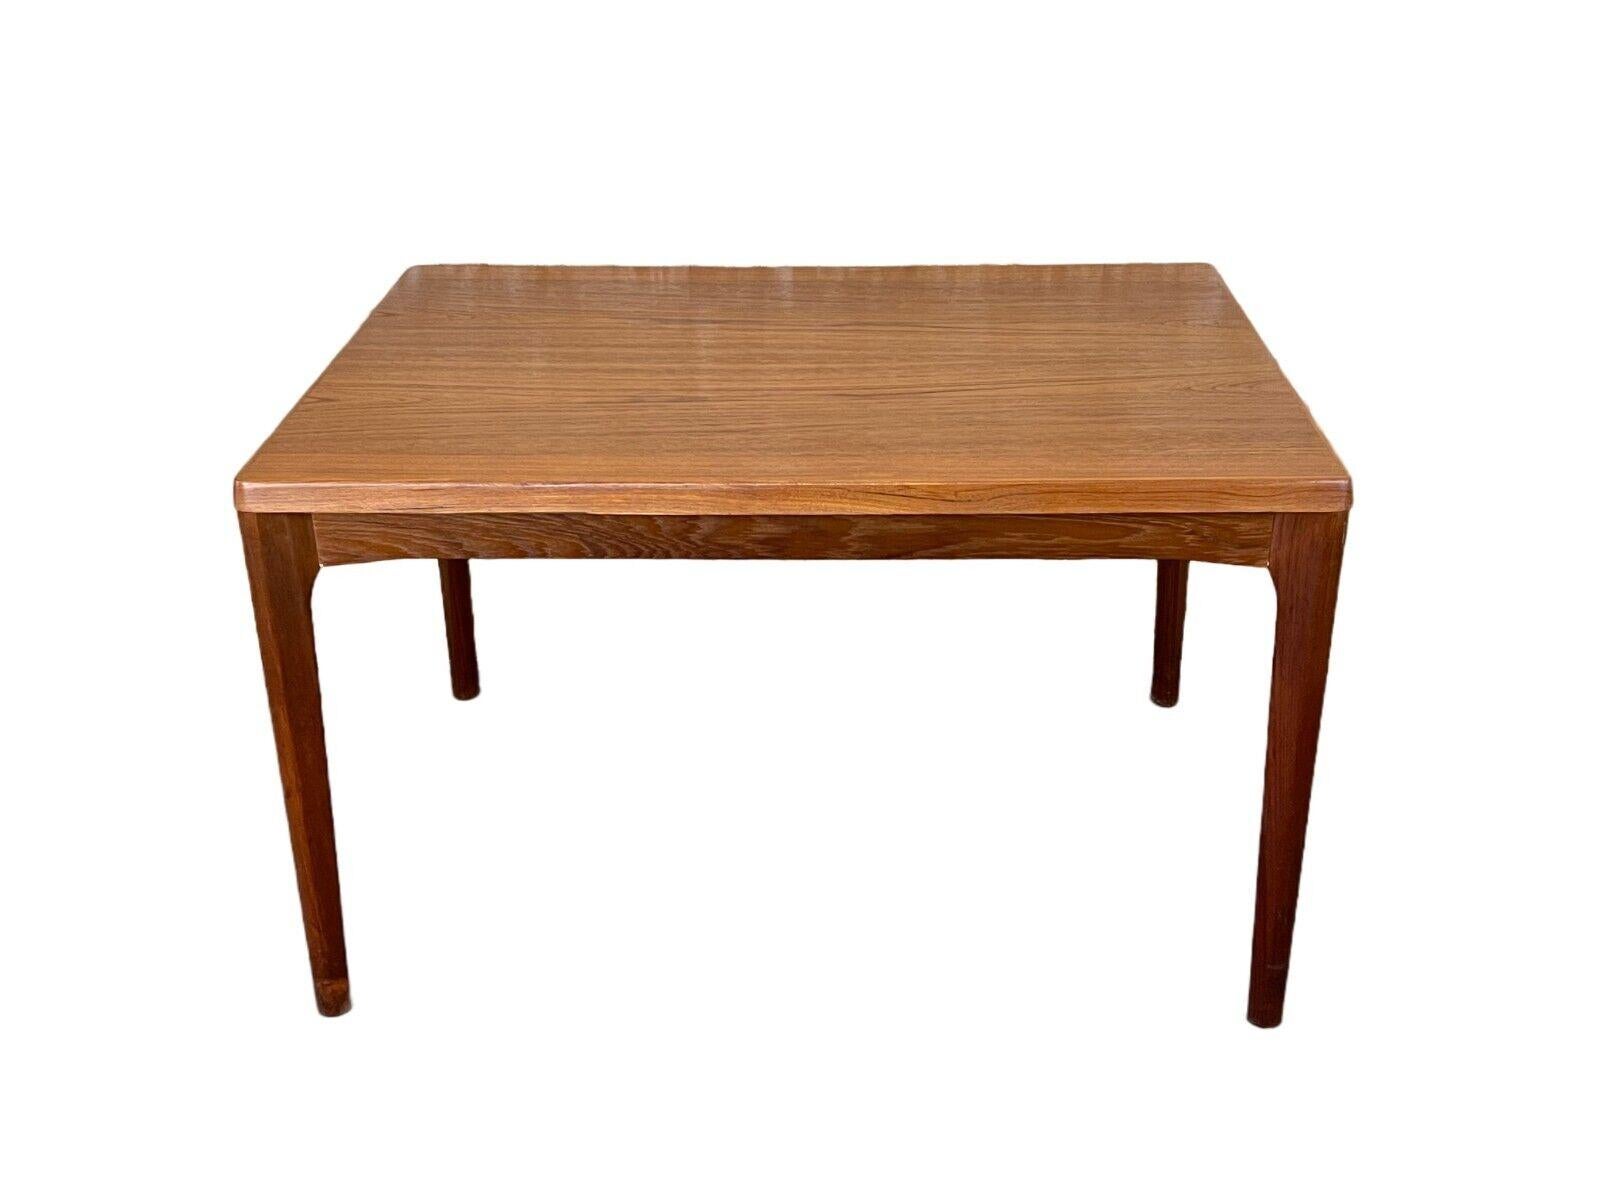 Teak dining table dining table Henning Kjaernulf Danish Design, 1960s-1970s.

Object: dining table

Manufacturer: Vejle

Condition: good

Age: around 1960-1970

Dimensions:

Width = 120cm
Depth = 85cm
Height = 73cm
extendable + 2 x